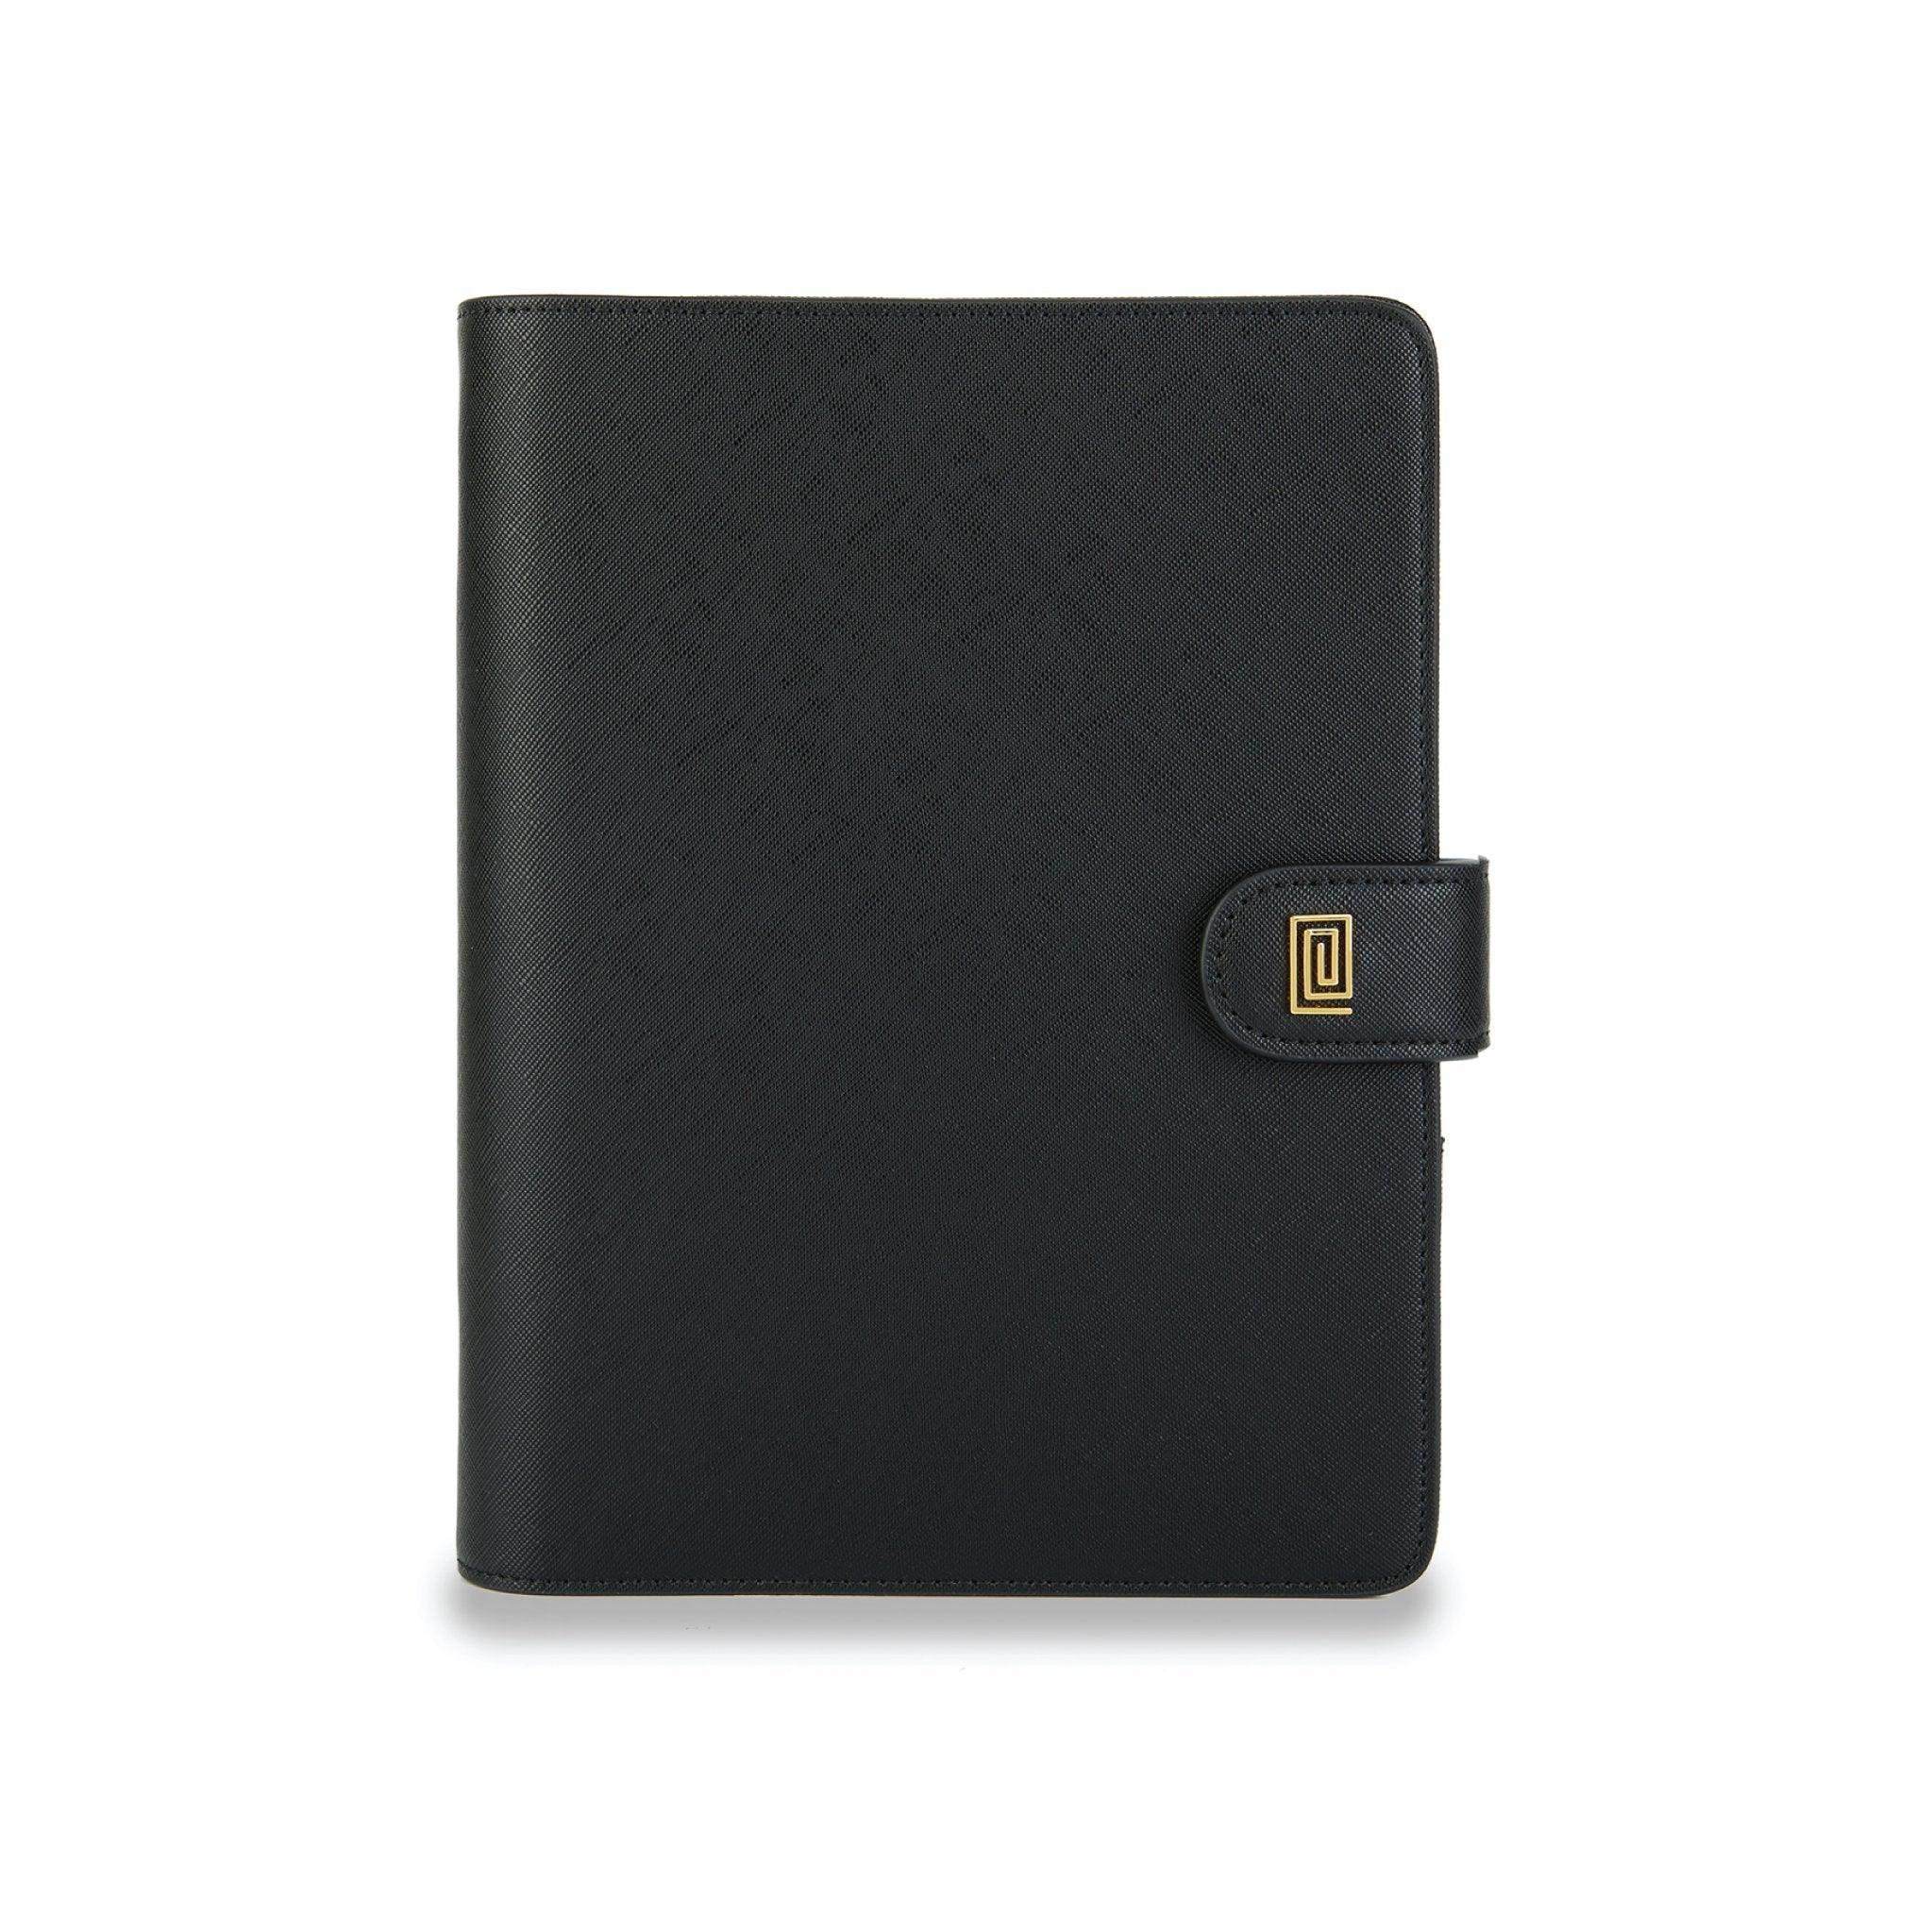 Gold on Jet Black Saffiano Peso Ring | OUTLET | SS2. Peso Ring Agenda | Personal Planner Cover | Final Sale | NOTIQ